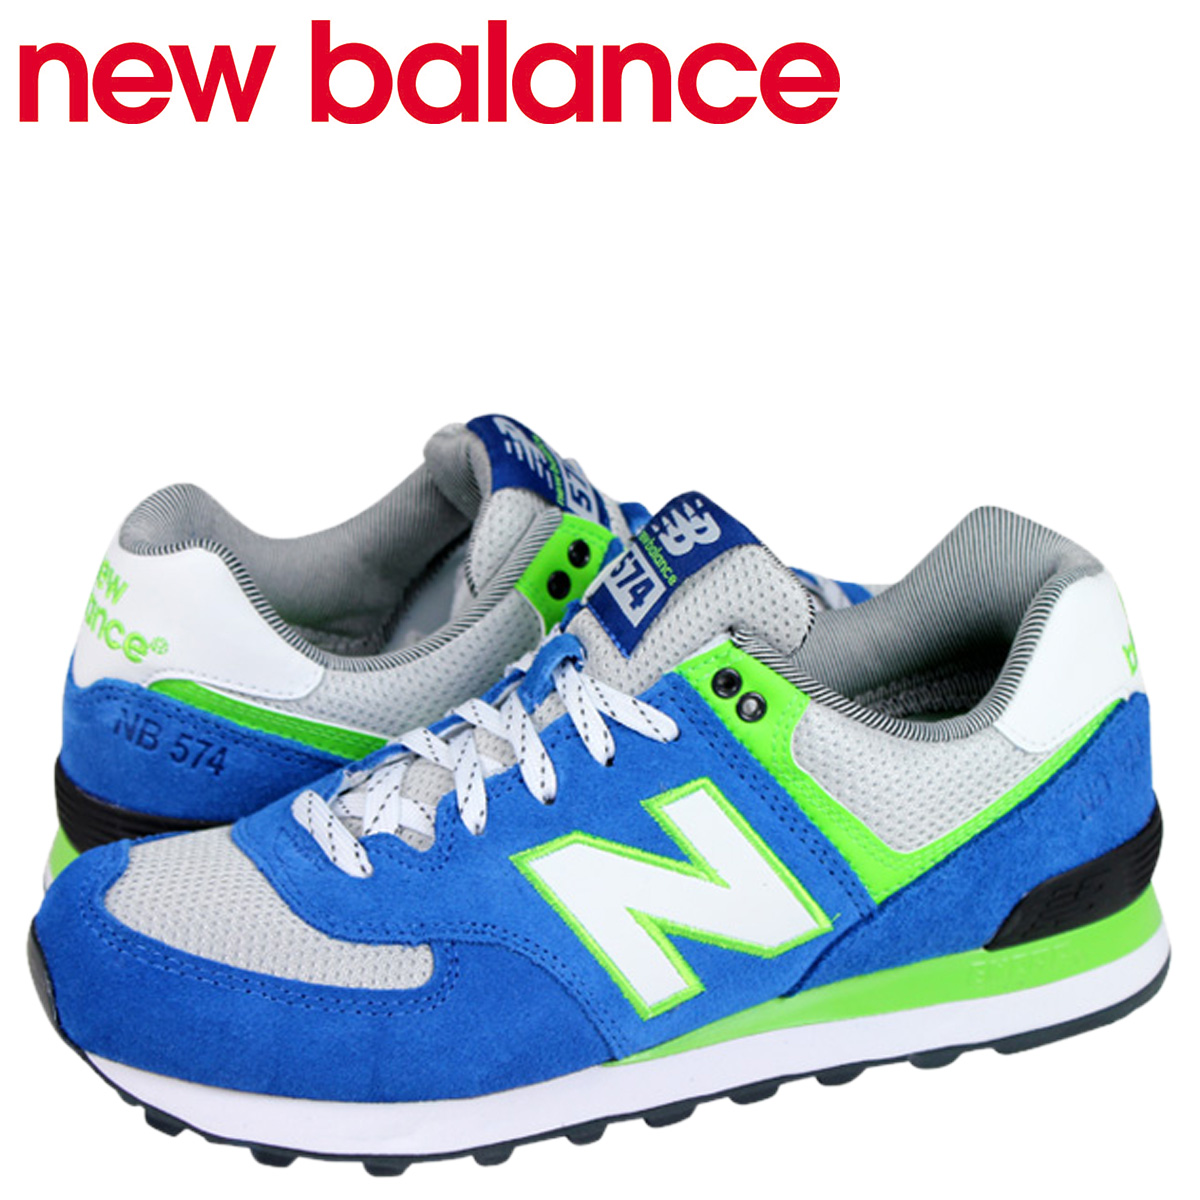 new balance 574 green and blue